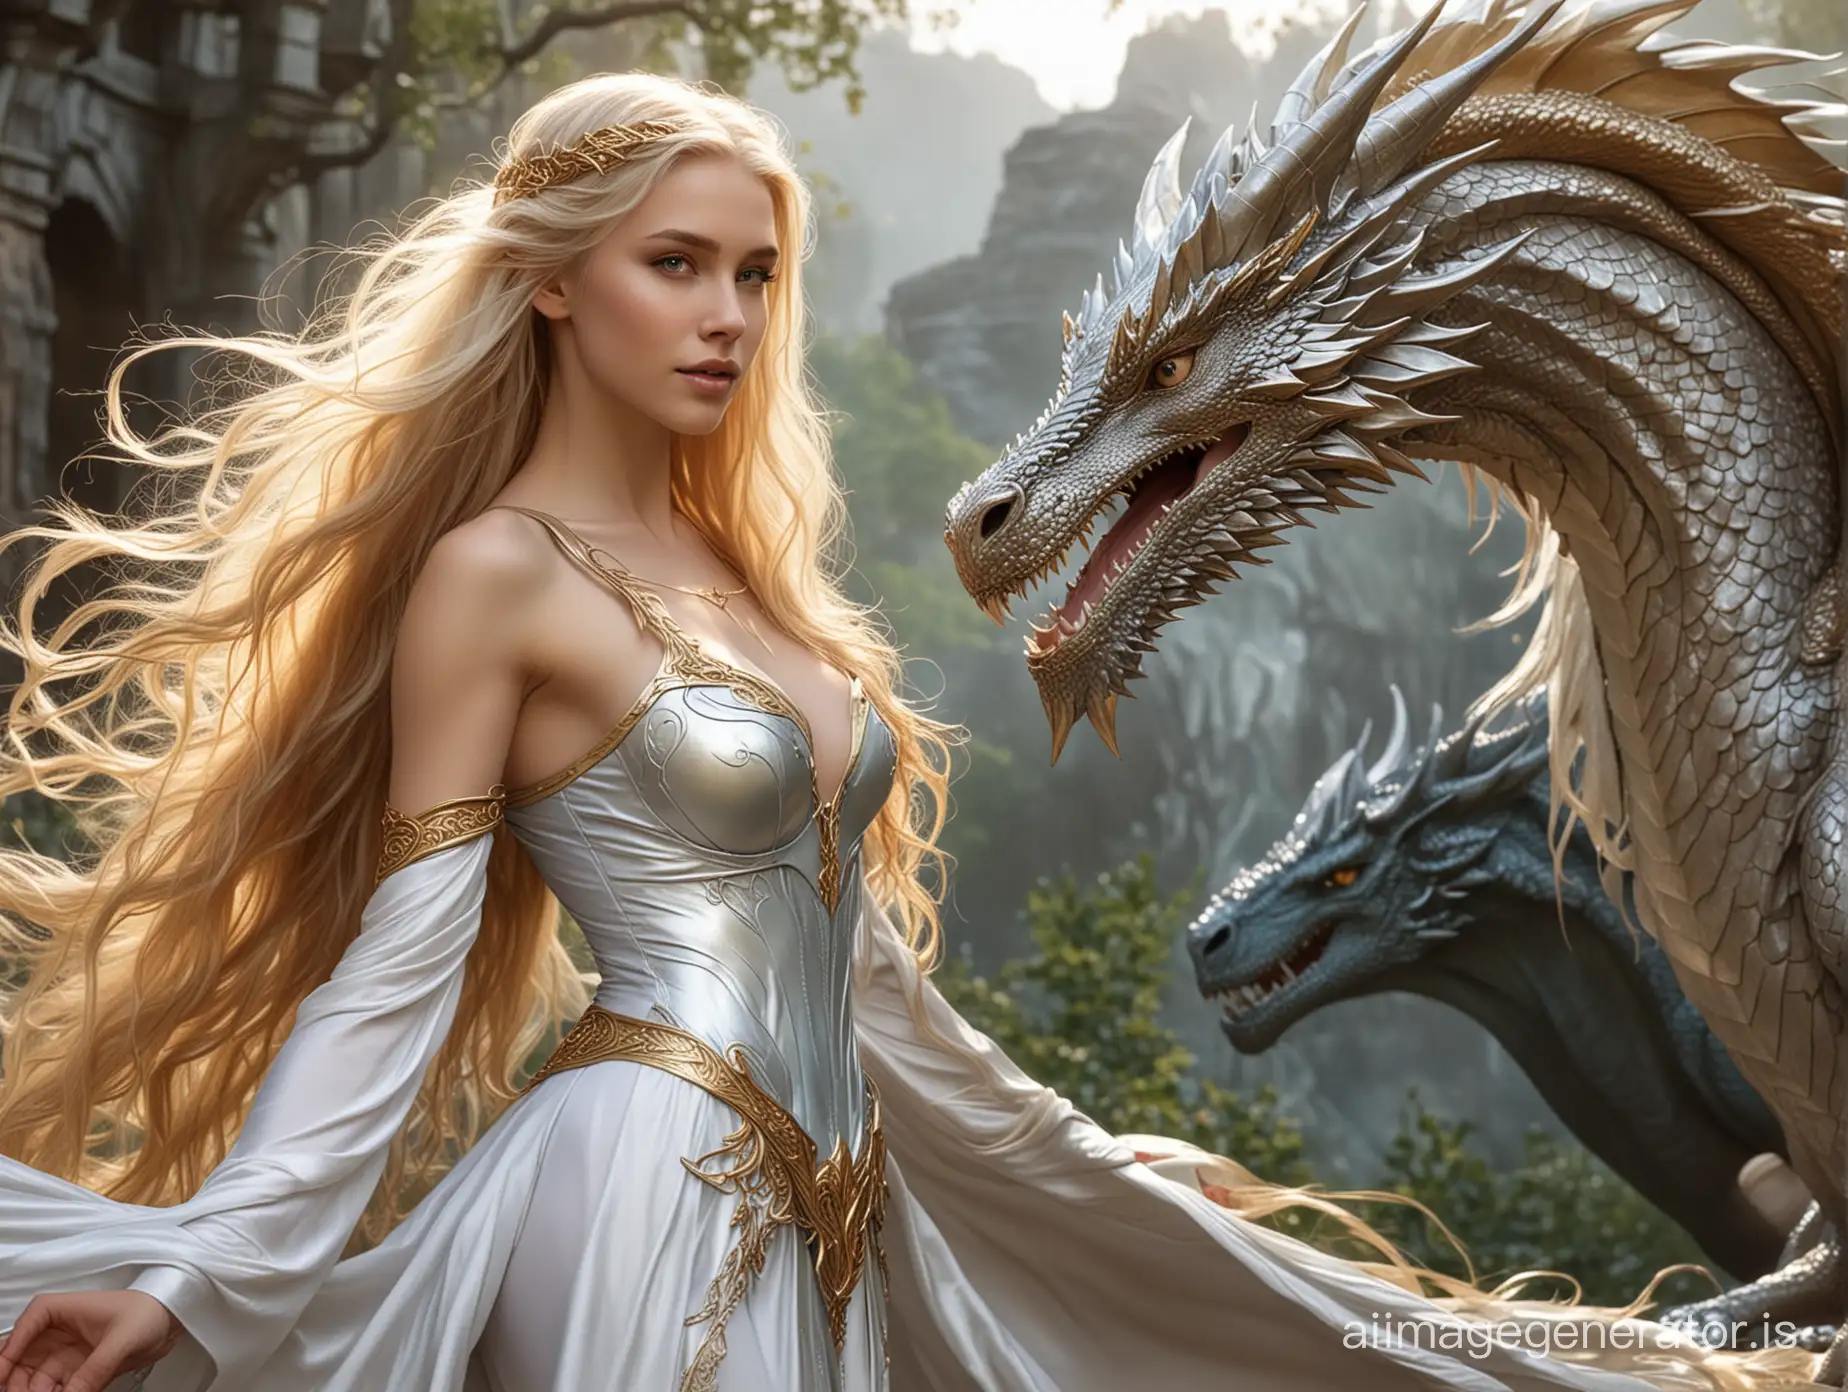 The scantily clad princess, elven, long, flowing golden hair, and her silver dragon